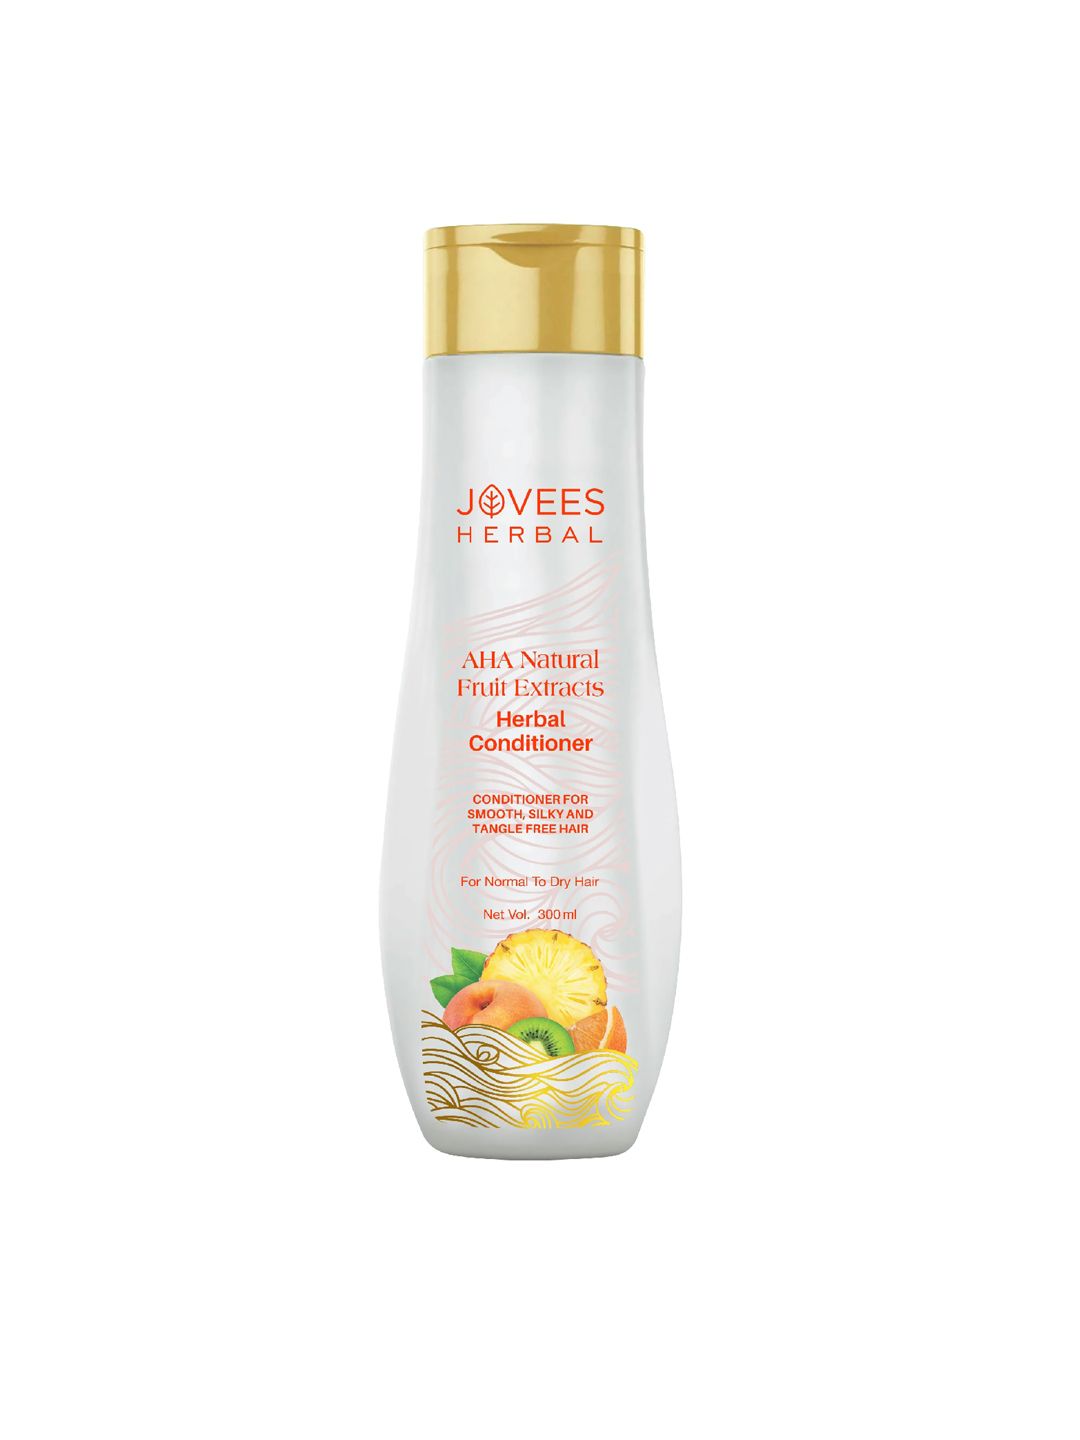 Jovees Herbal Hair Conditioner 300 ml Price in India